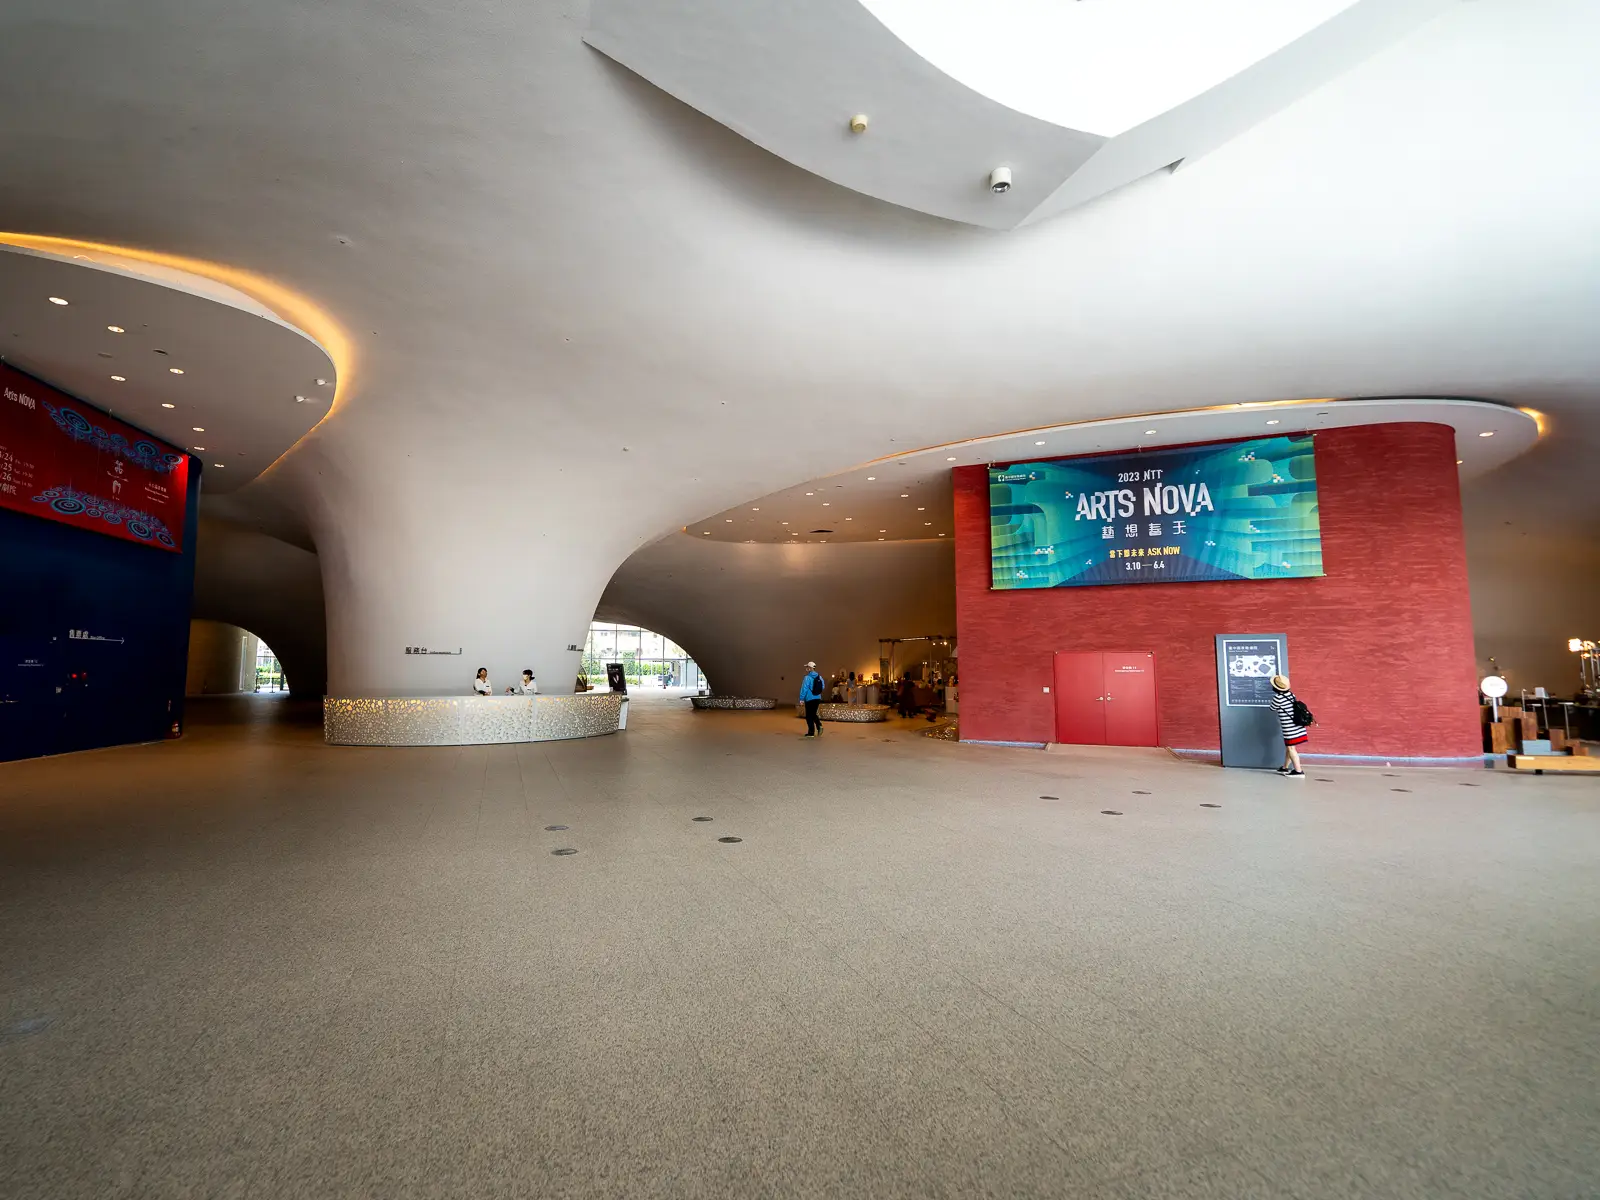 The first-floor lobby is located in a large cavernous space.